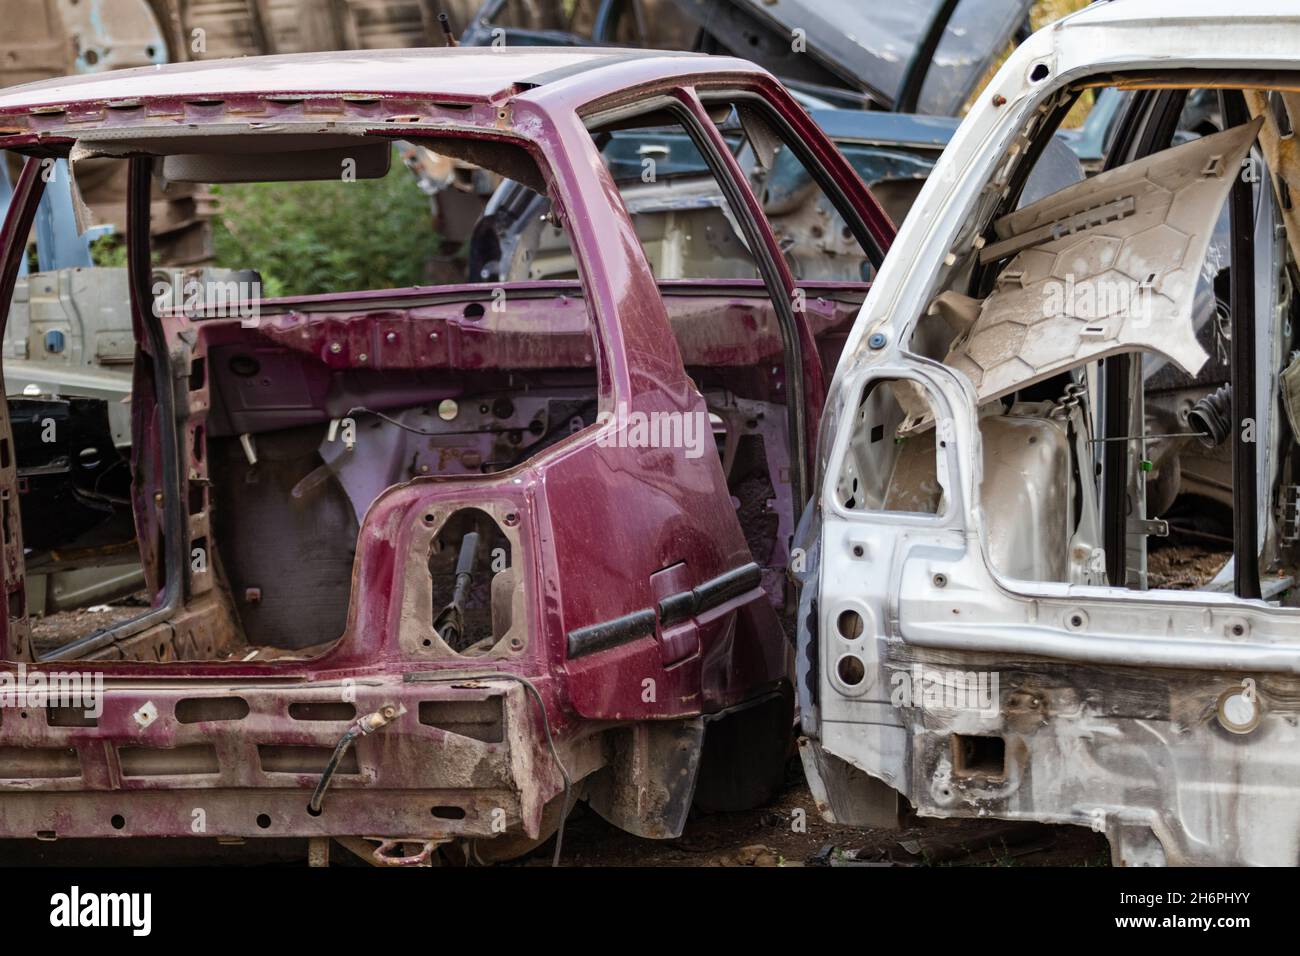 Two disassembled cars body parts outdoor close-up view. Car dump, wreck at a junkyard ready for recycling Stock Photo